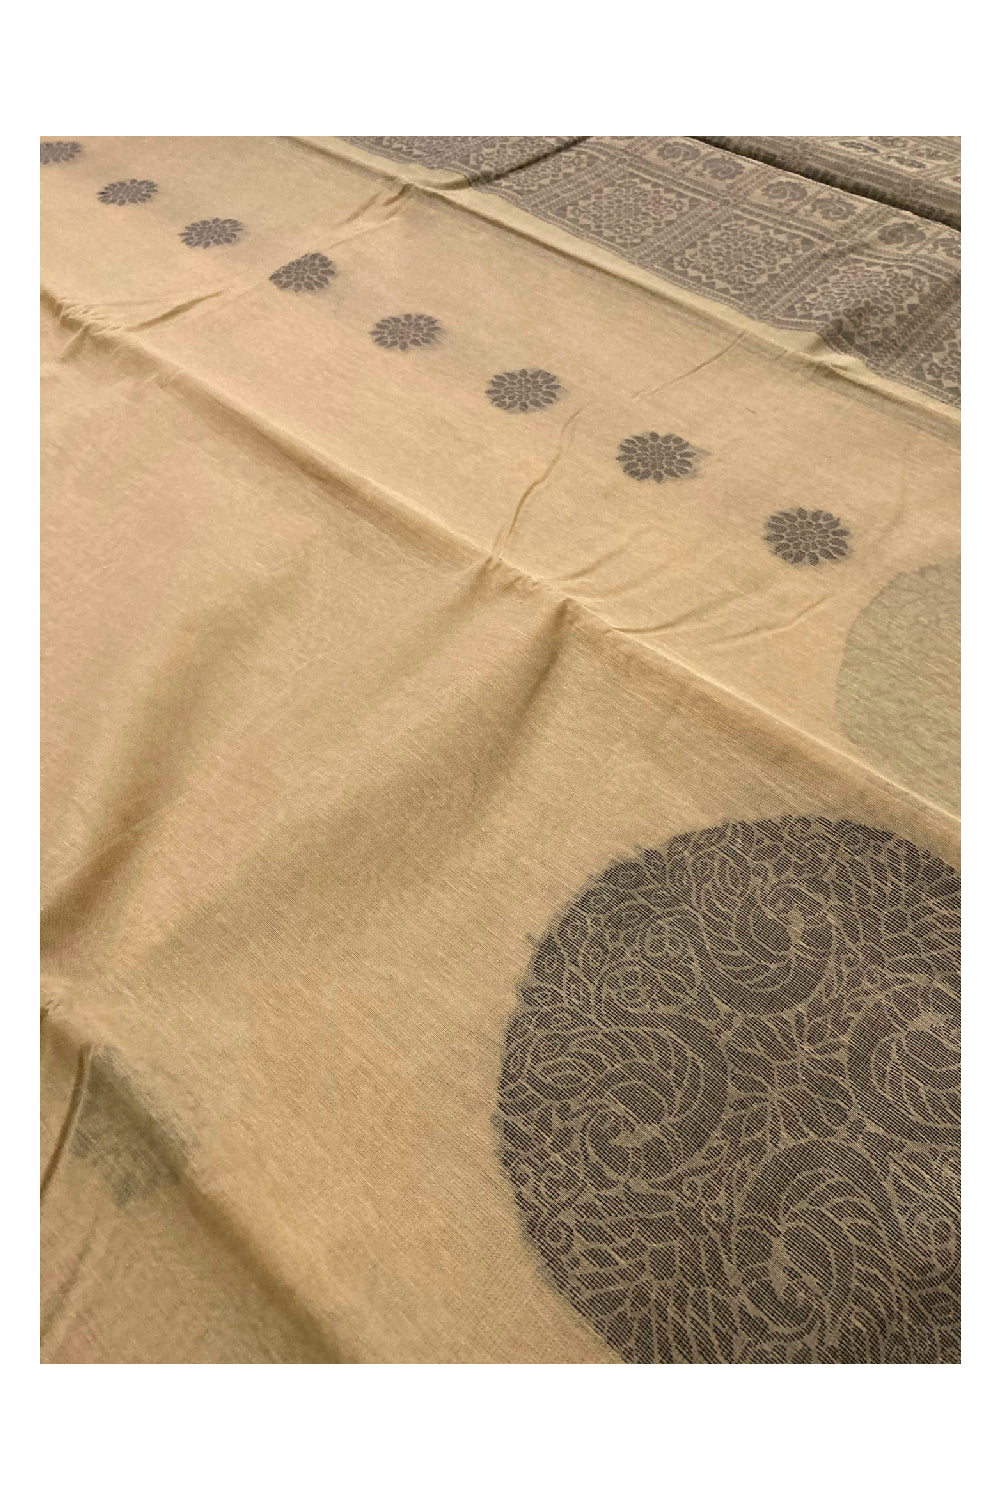 Southloom Sico Gadwal Semi Silk Saree in Light Brown with Peacock Motifs (Blouse Piece with Work)